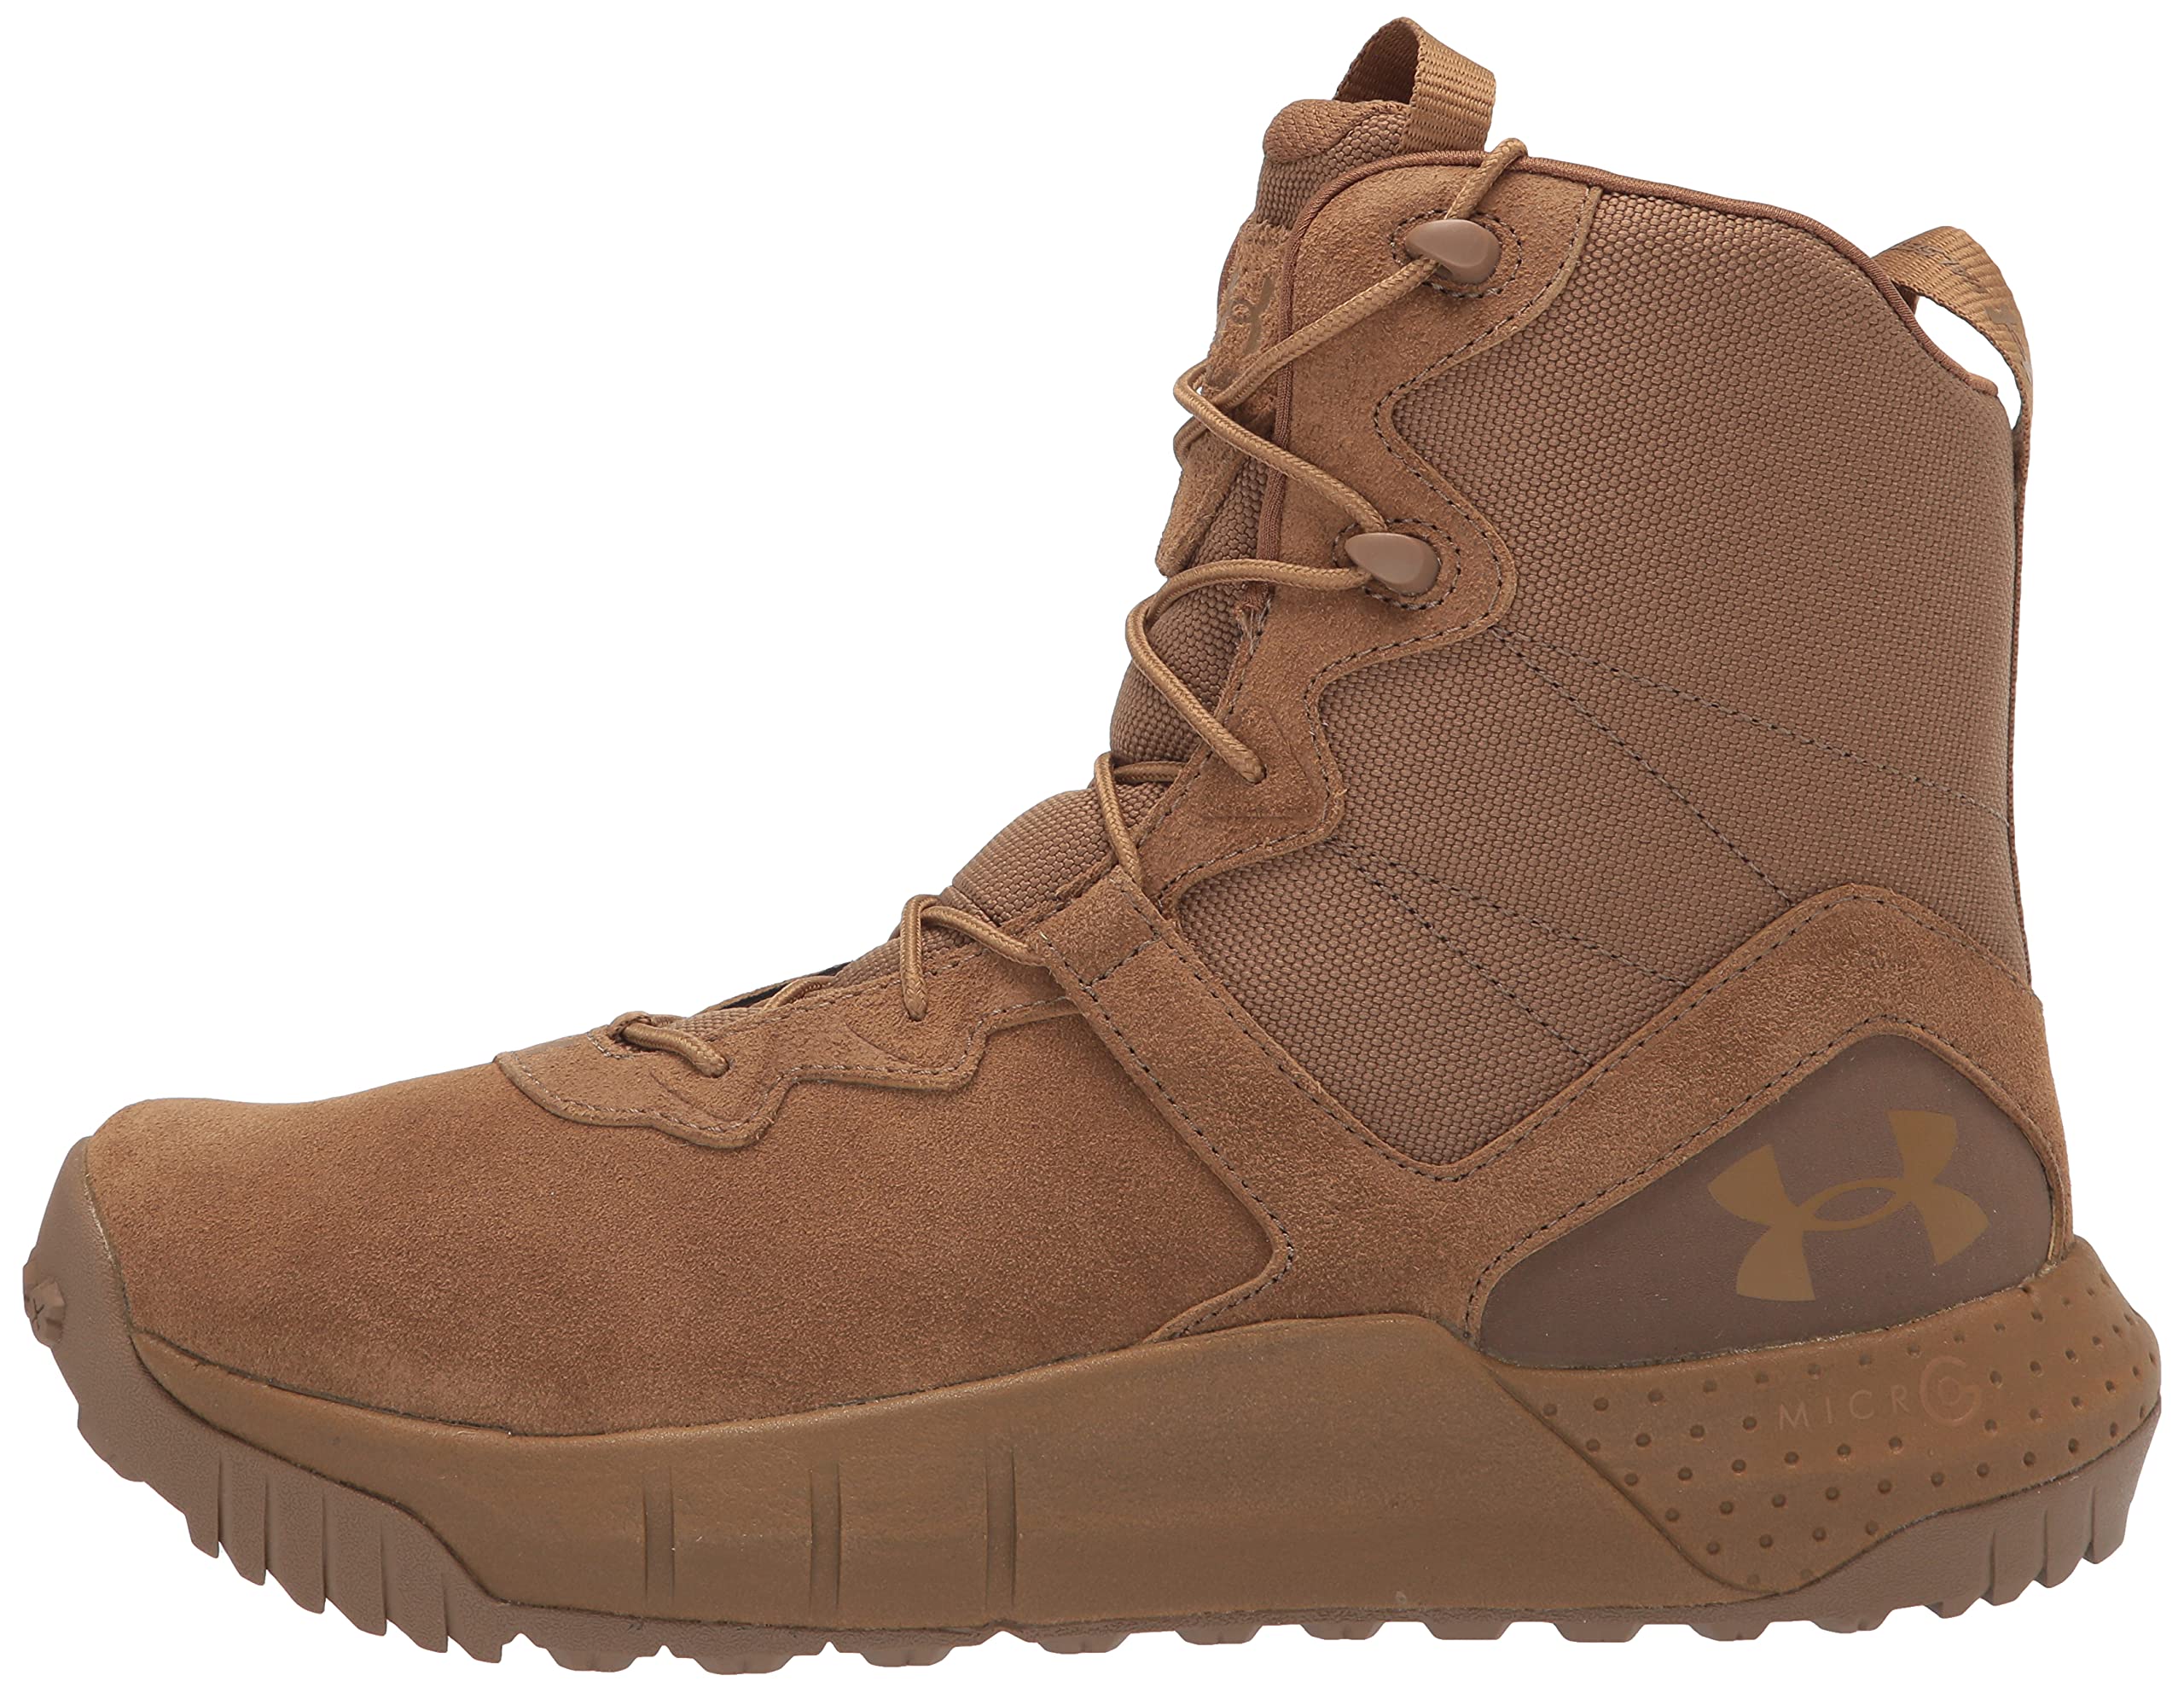 Under Armour Men's Micro G Valsetz Lthr Military and Tactical Boot